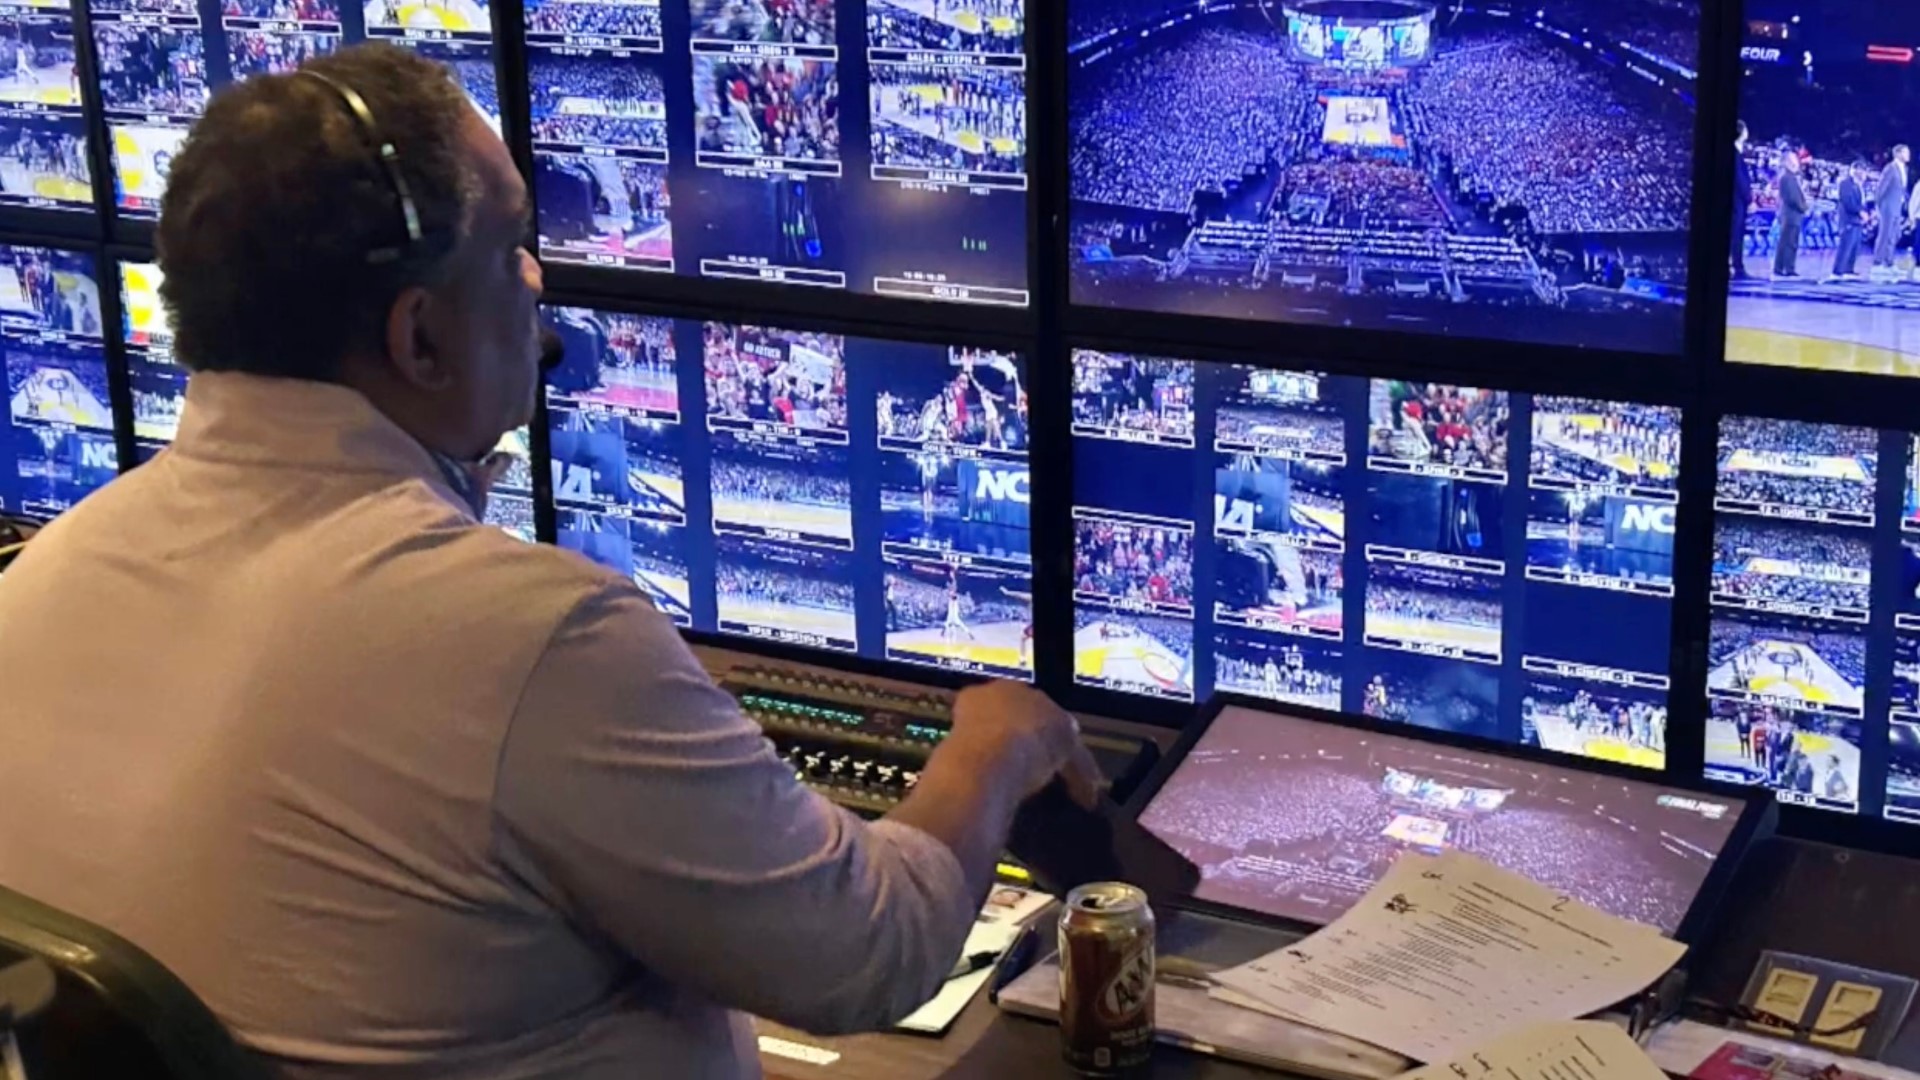 For the first time, CBS will have a person of color directing Monday nights NCAA championship game cbs8